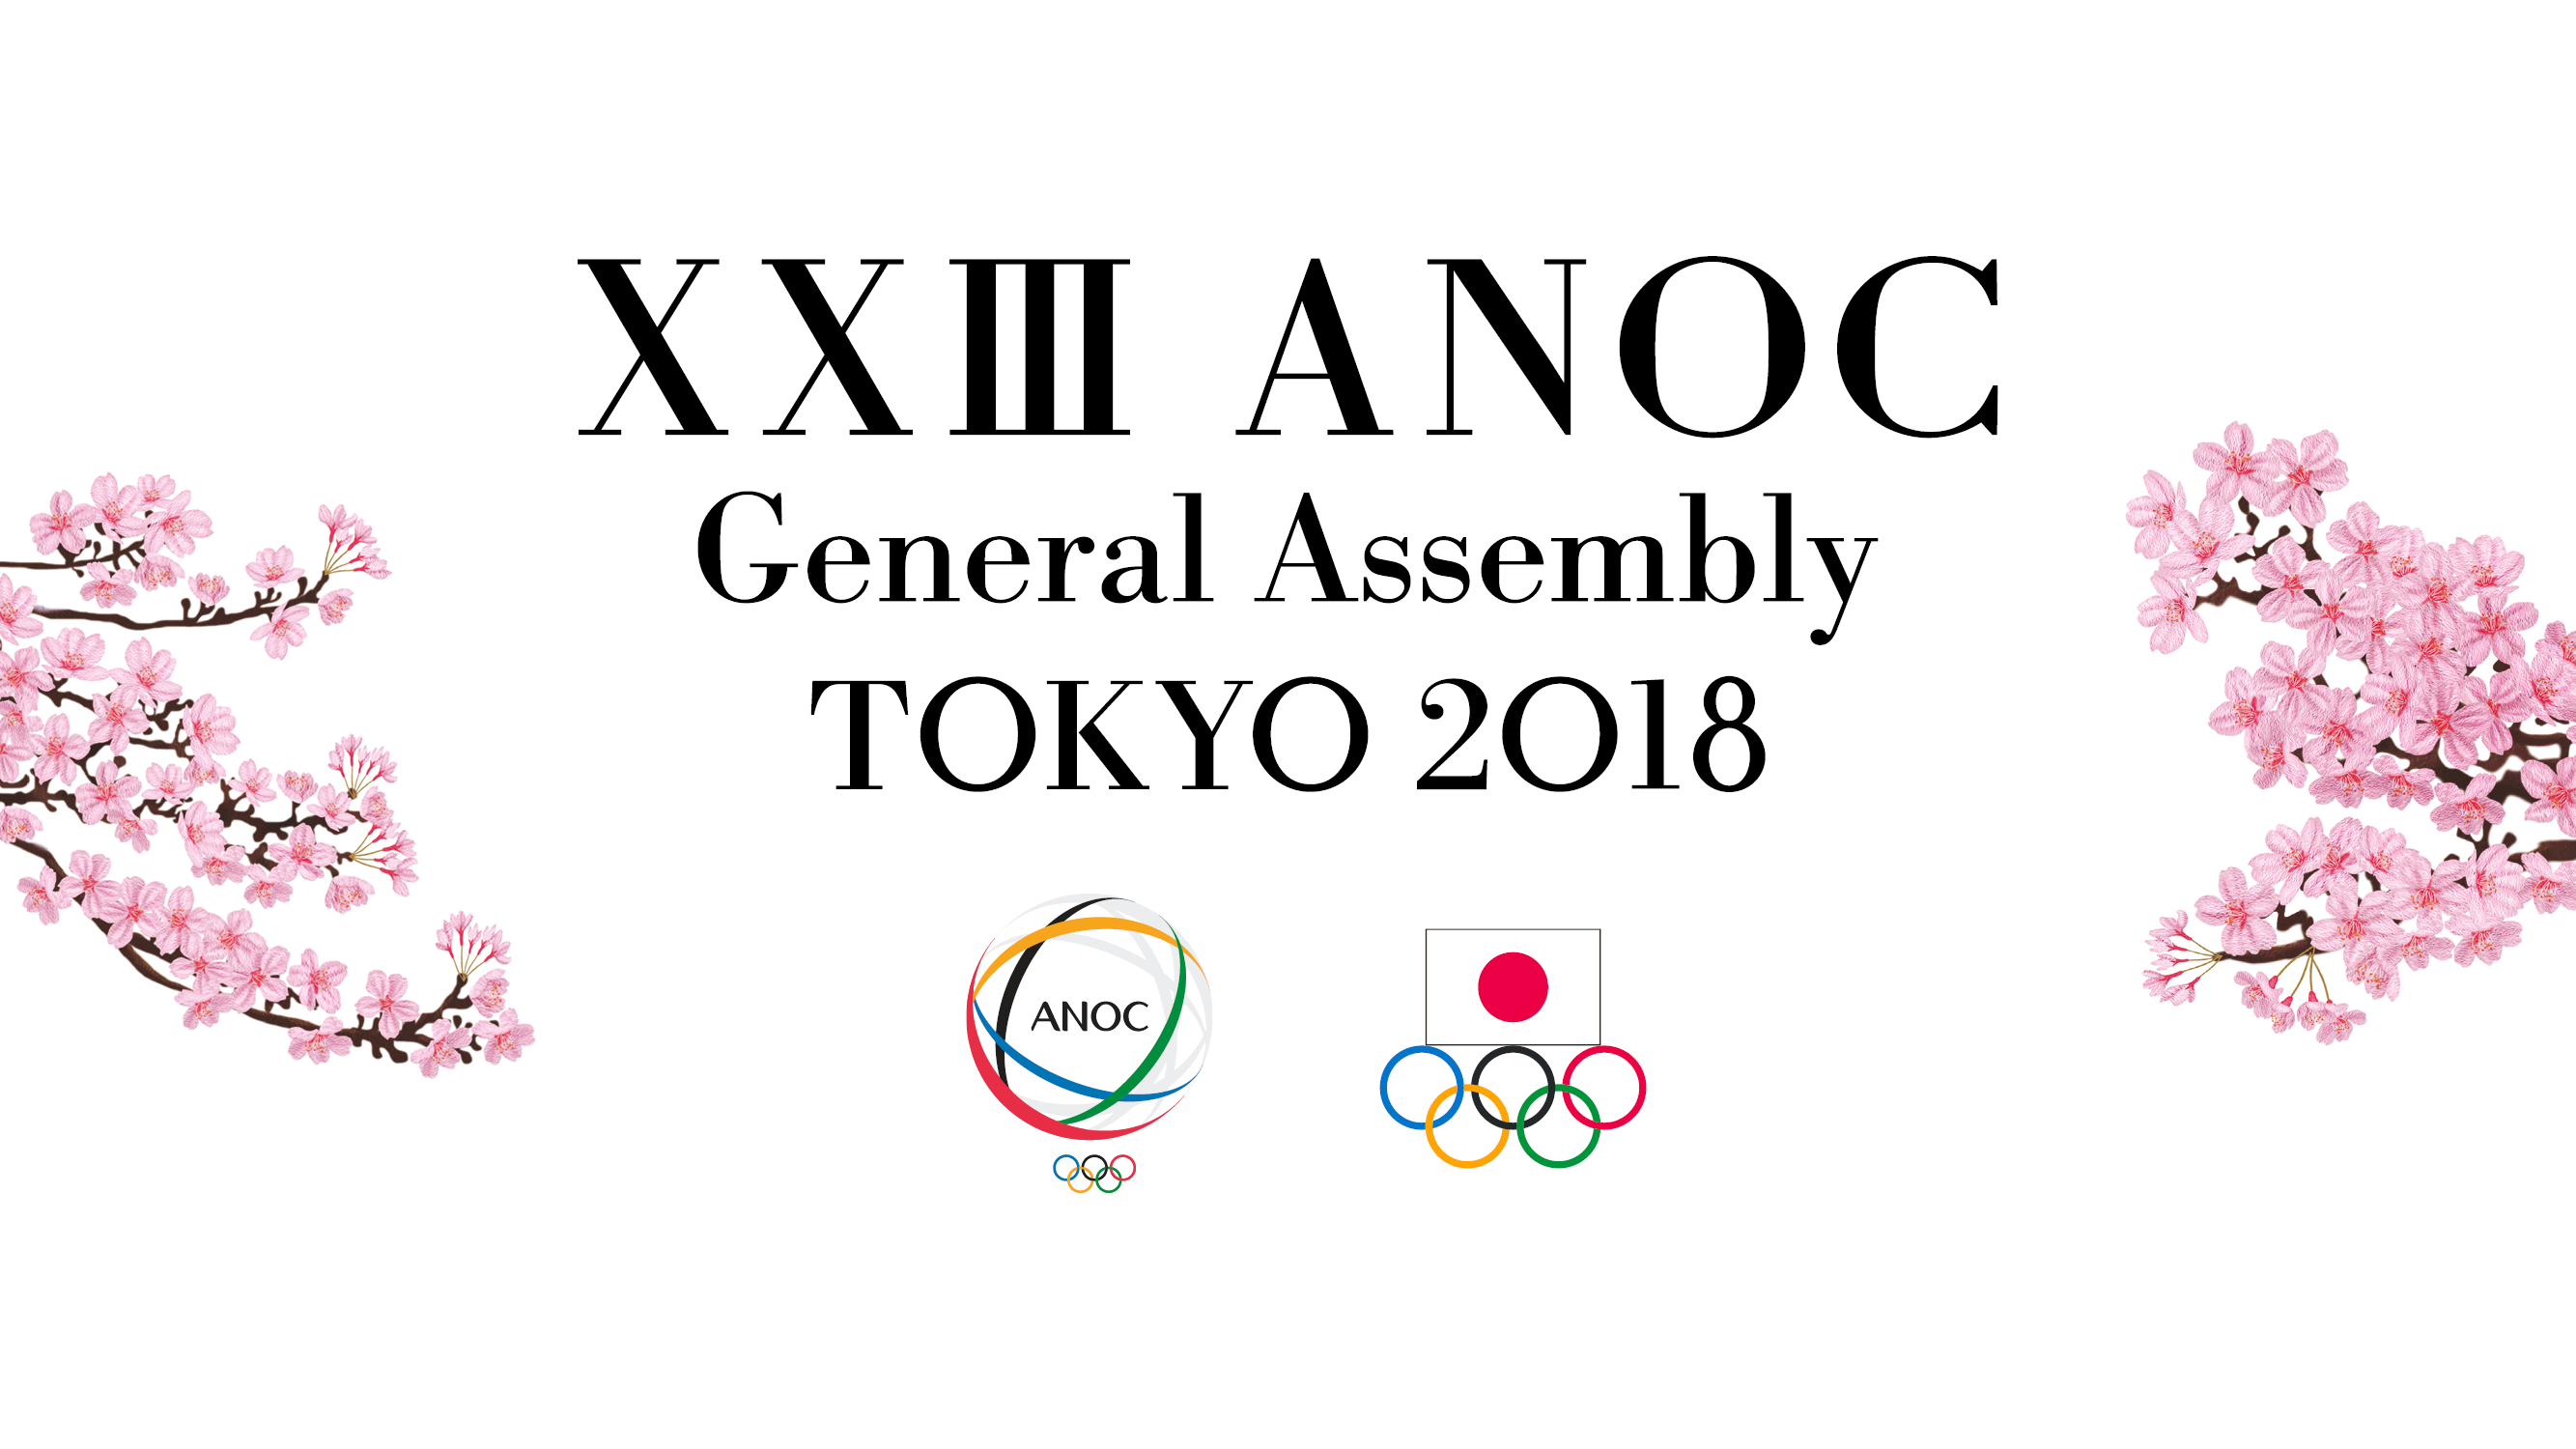 XXIII ANOC General Assembly and ANOC Awards 2018 set for Tokyo